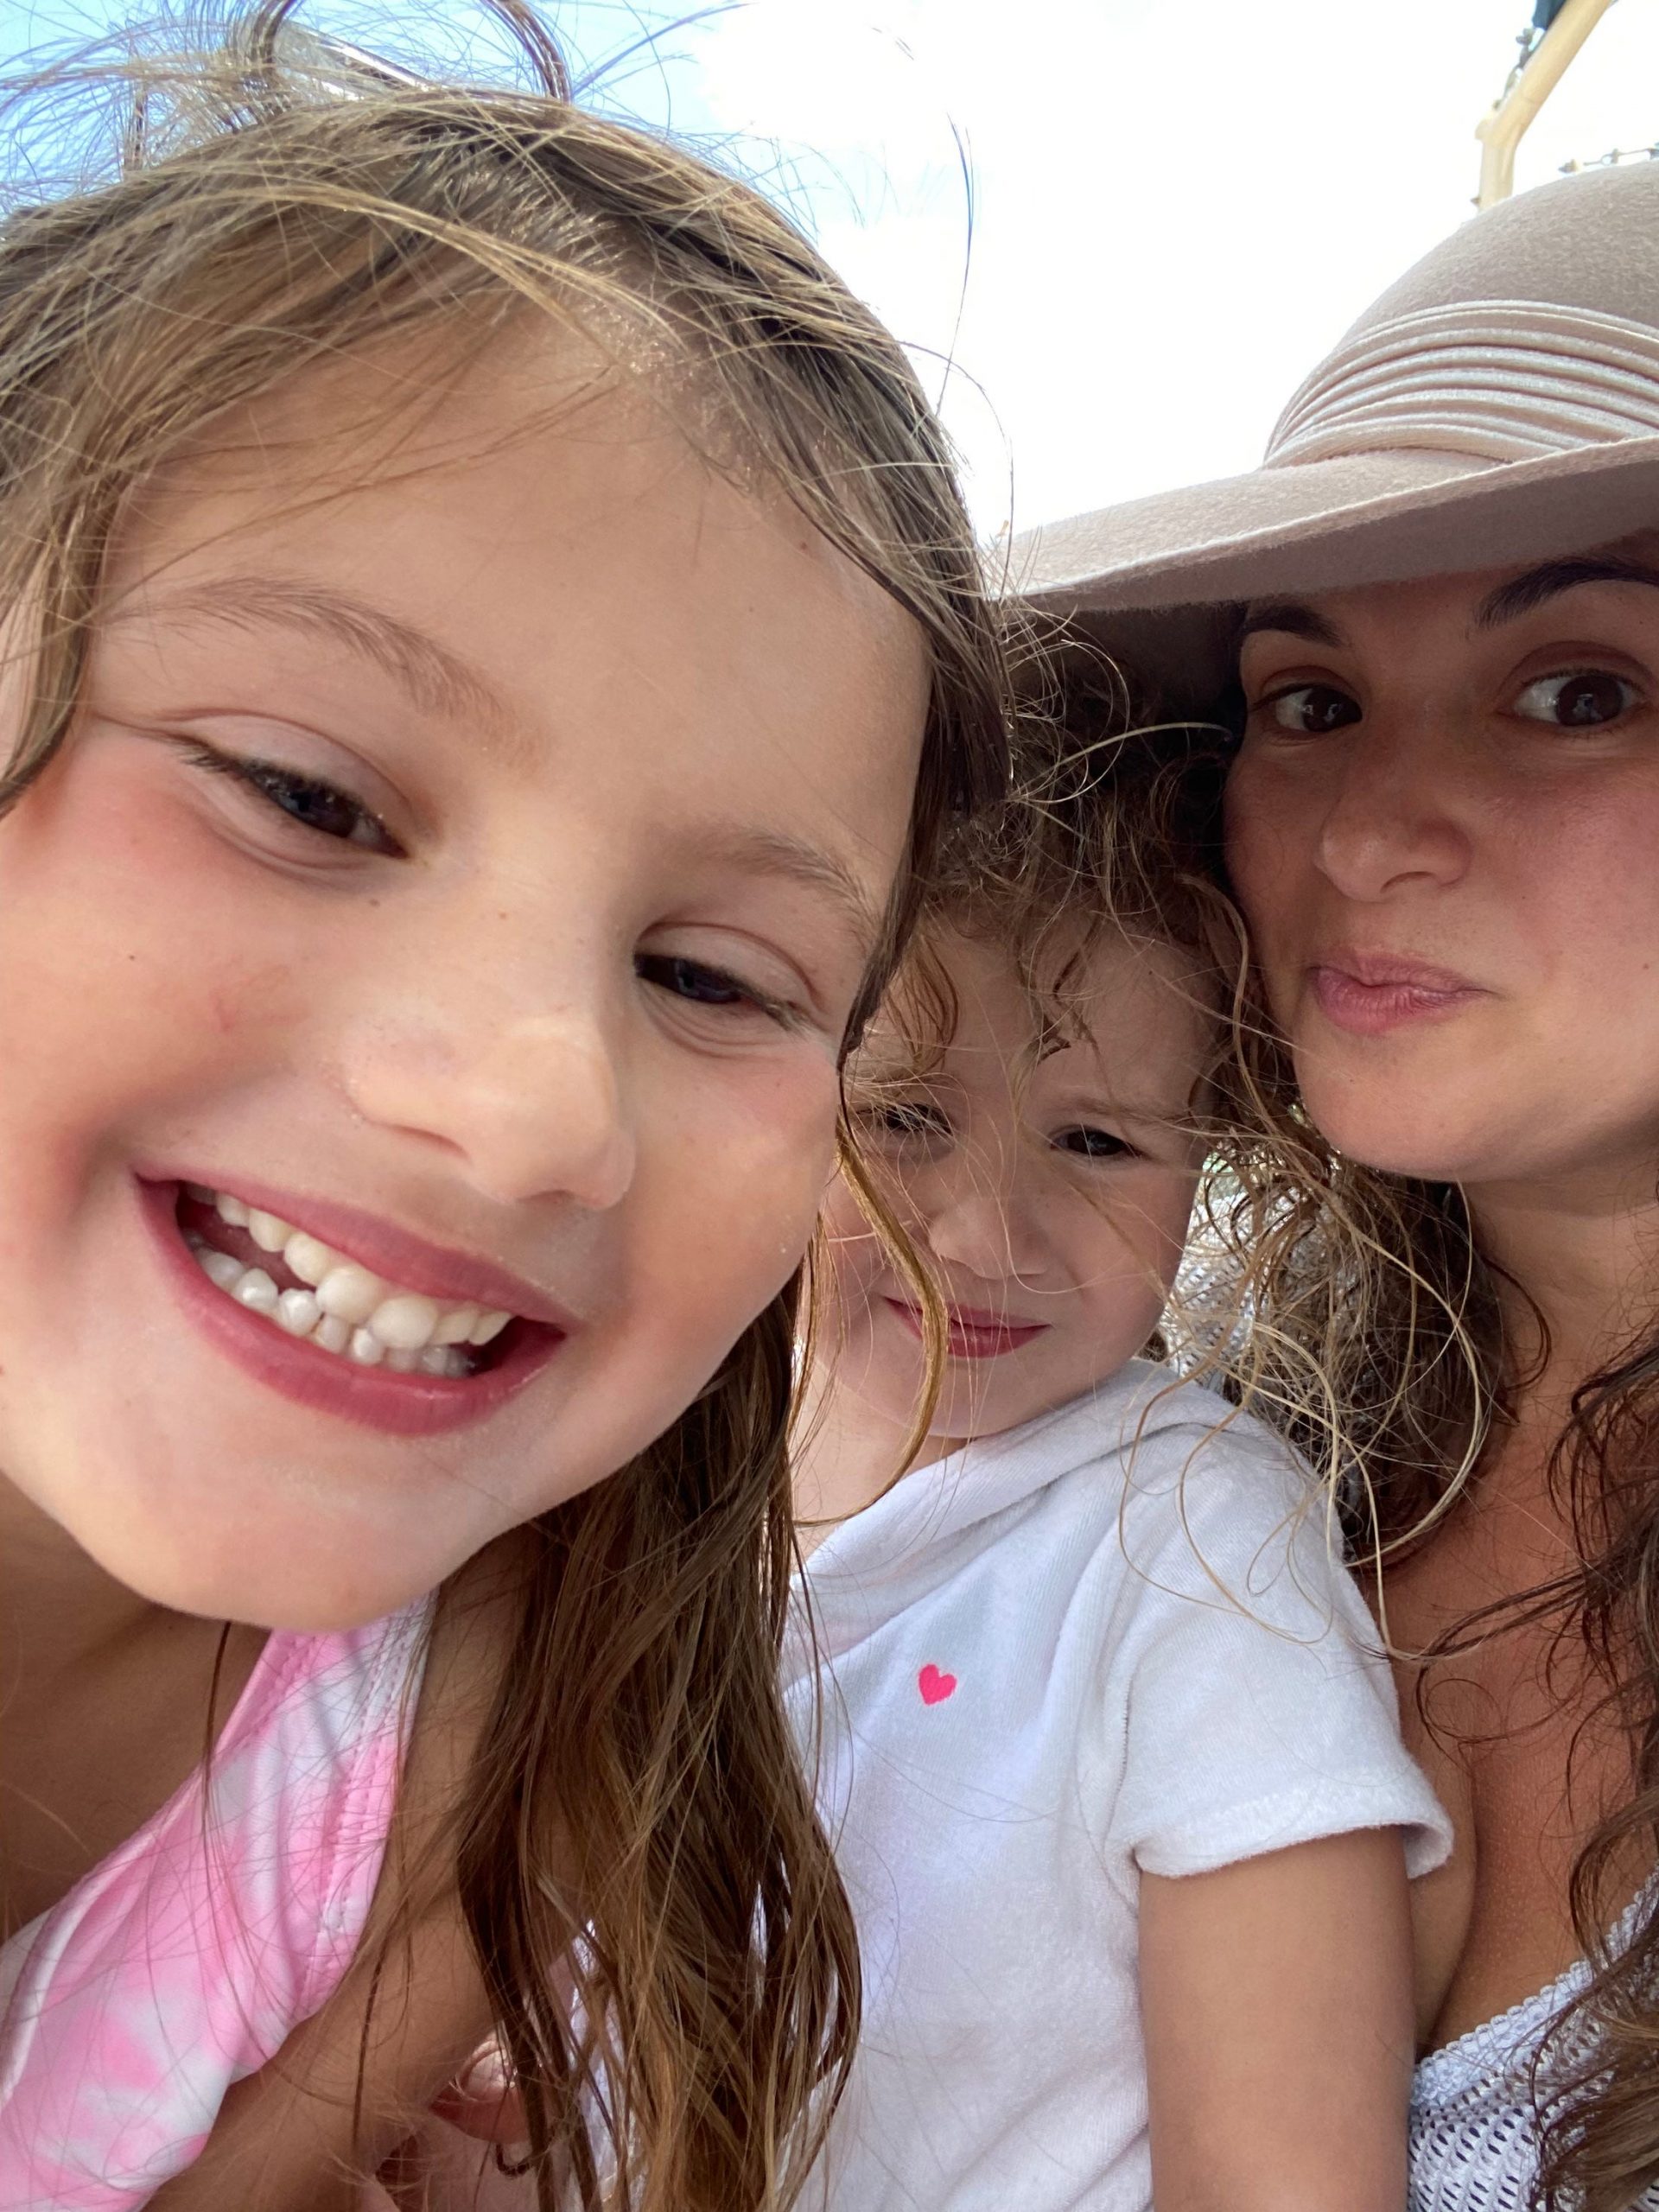 hilary young in a hat on the beach with her two daughters, 6 and 3.